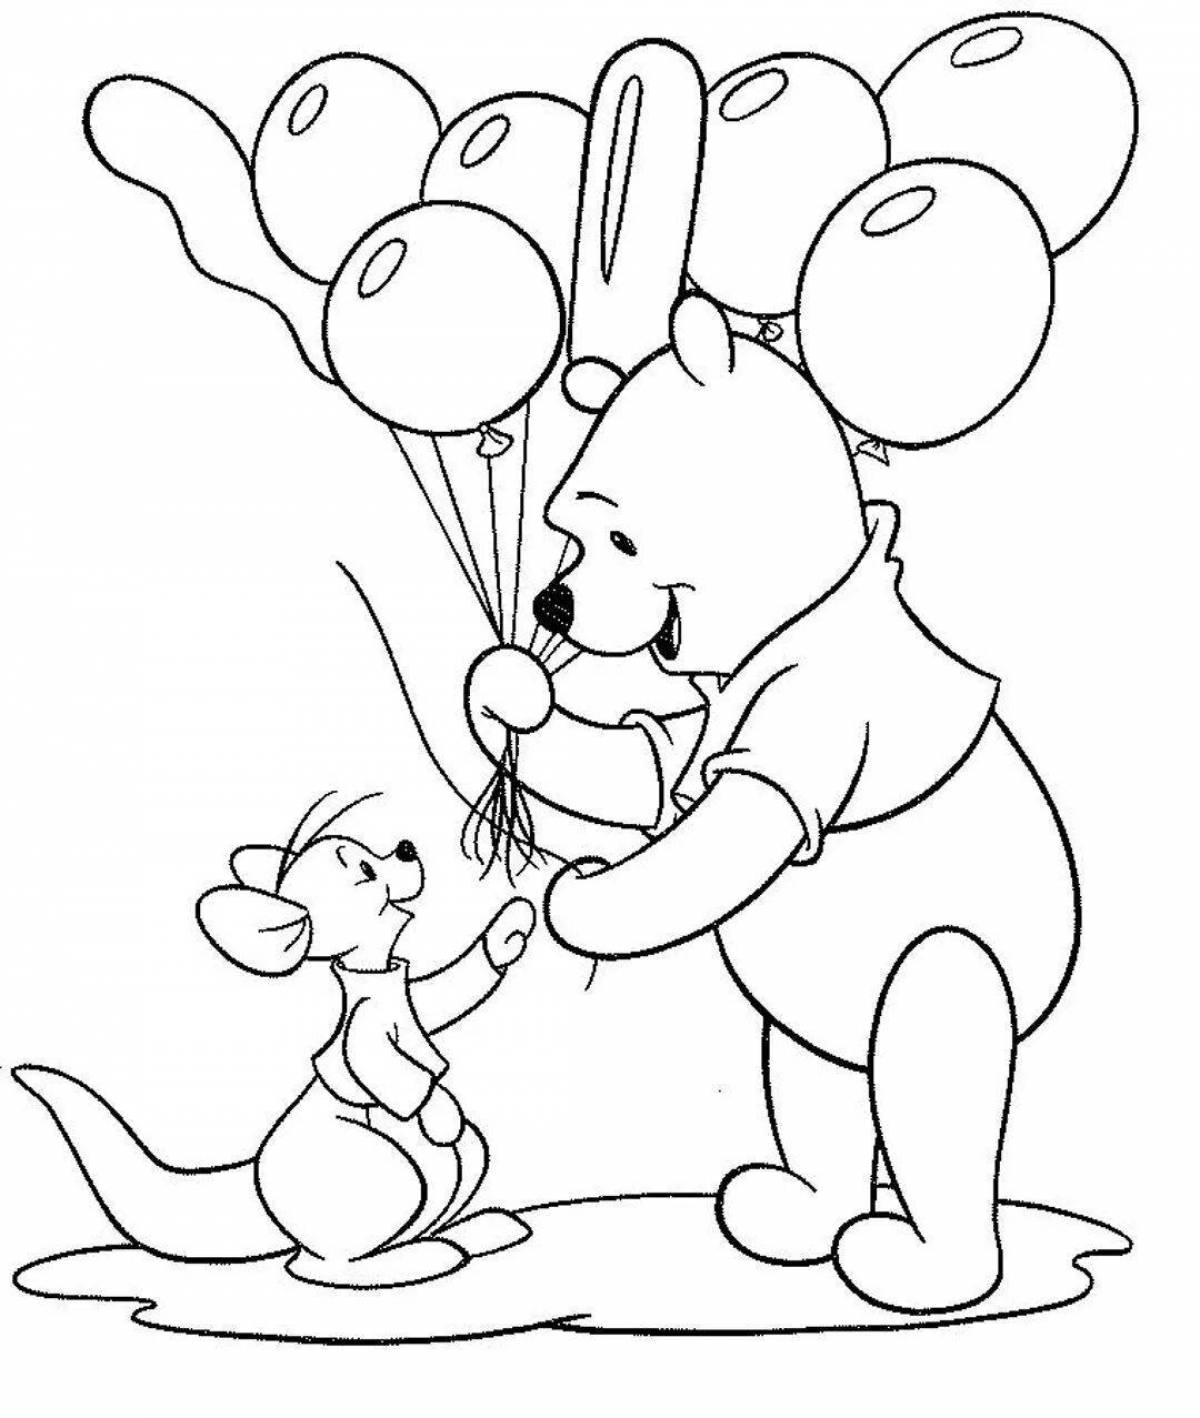 Animated friendship coloring page